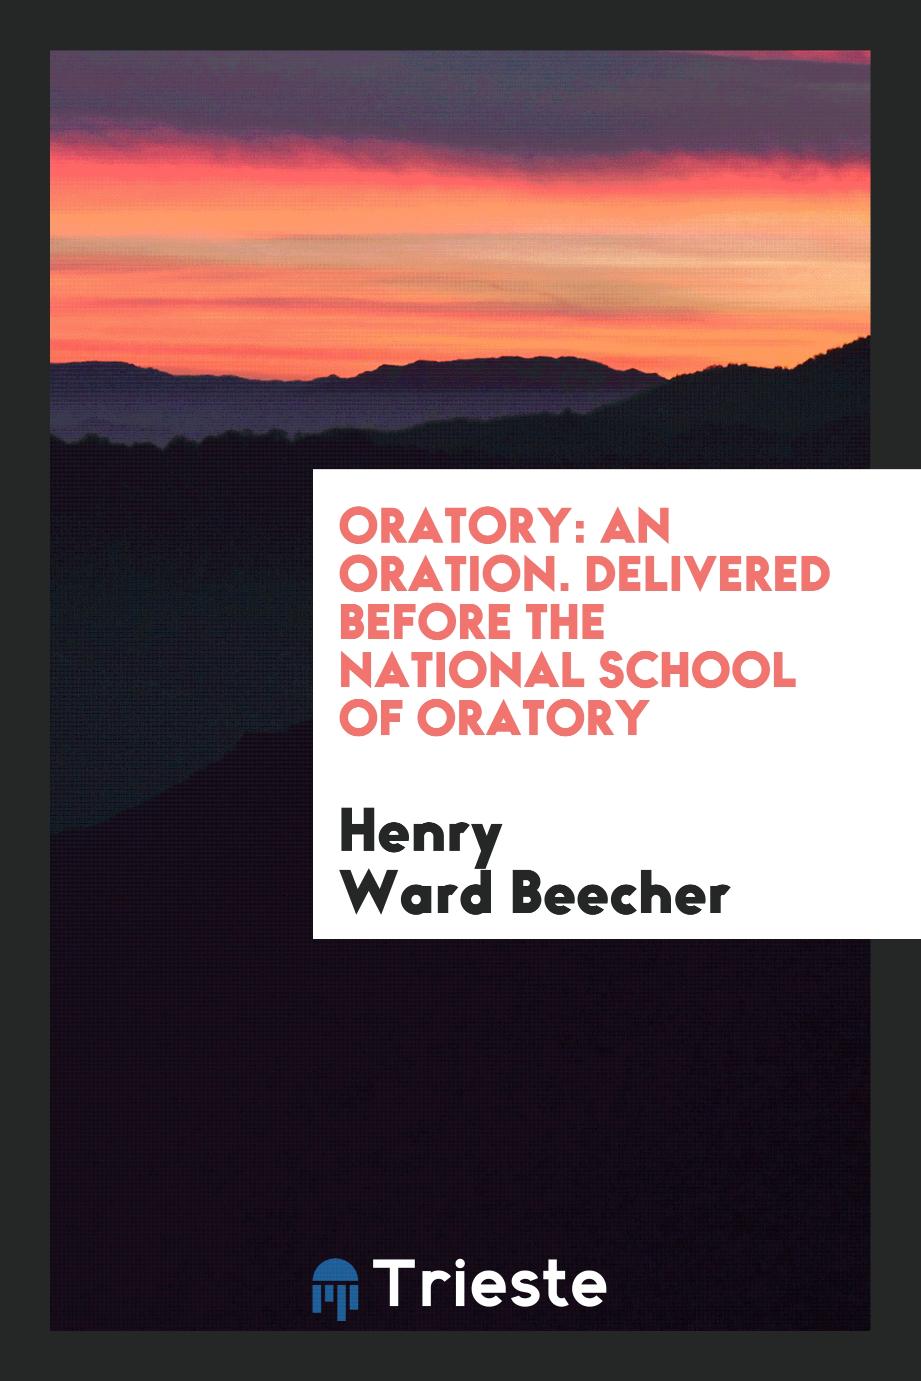 Oratory: an oration. Delivered before the National School of Oratory